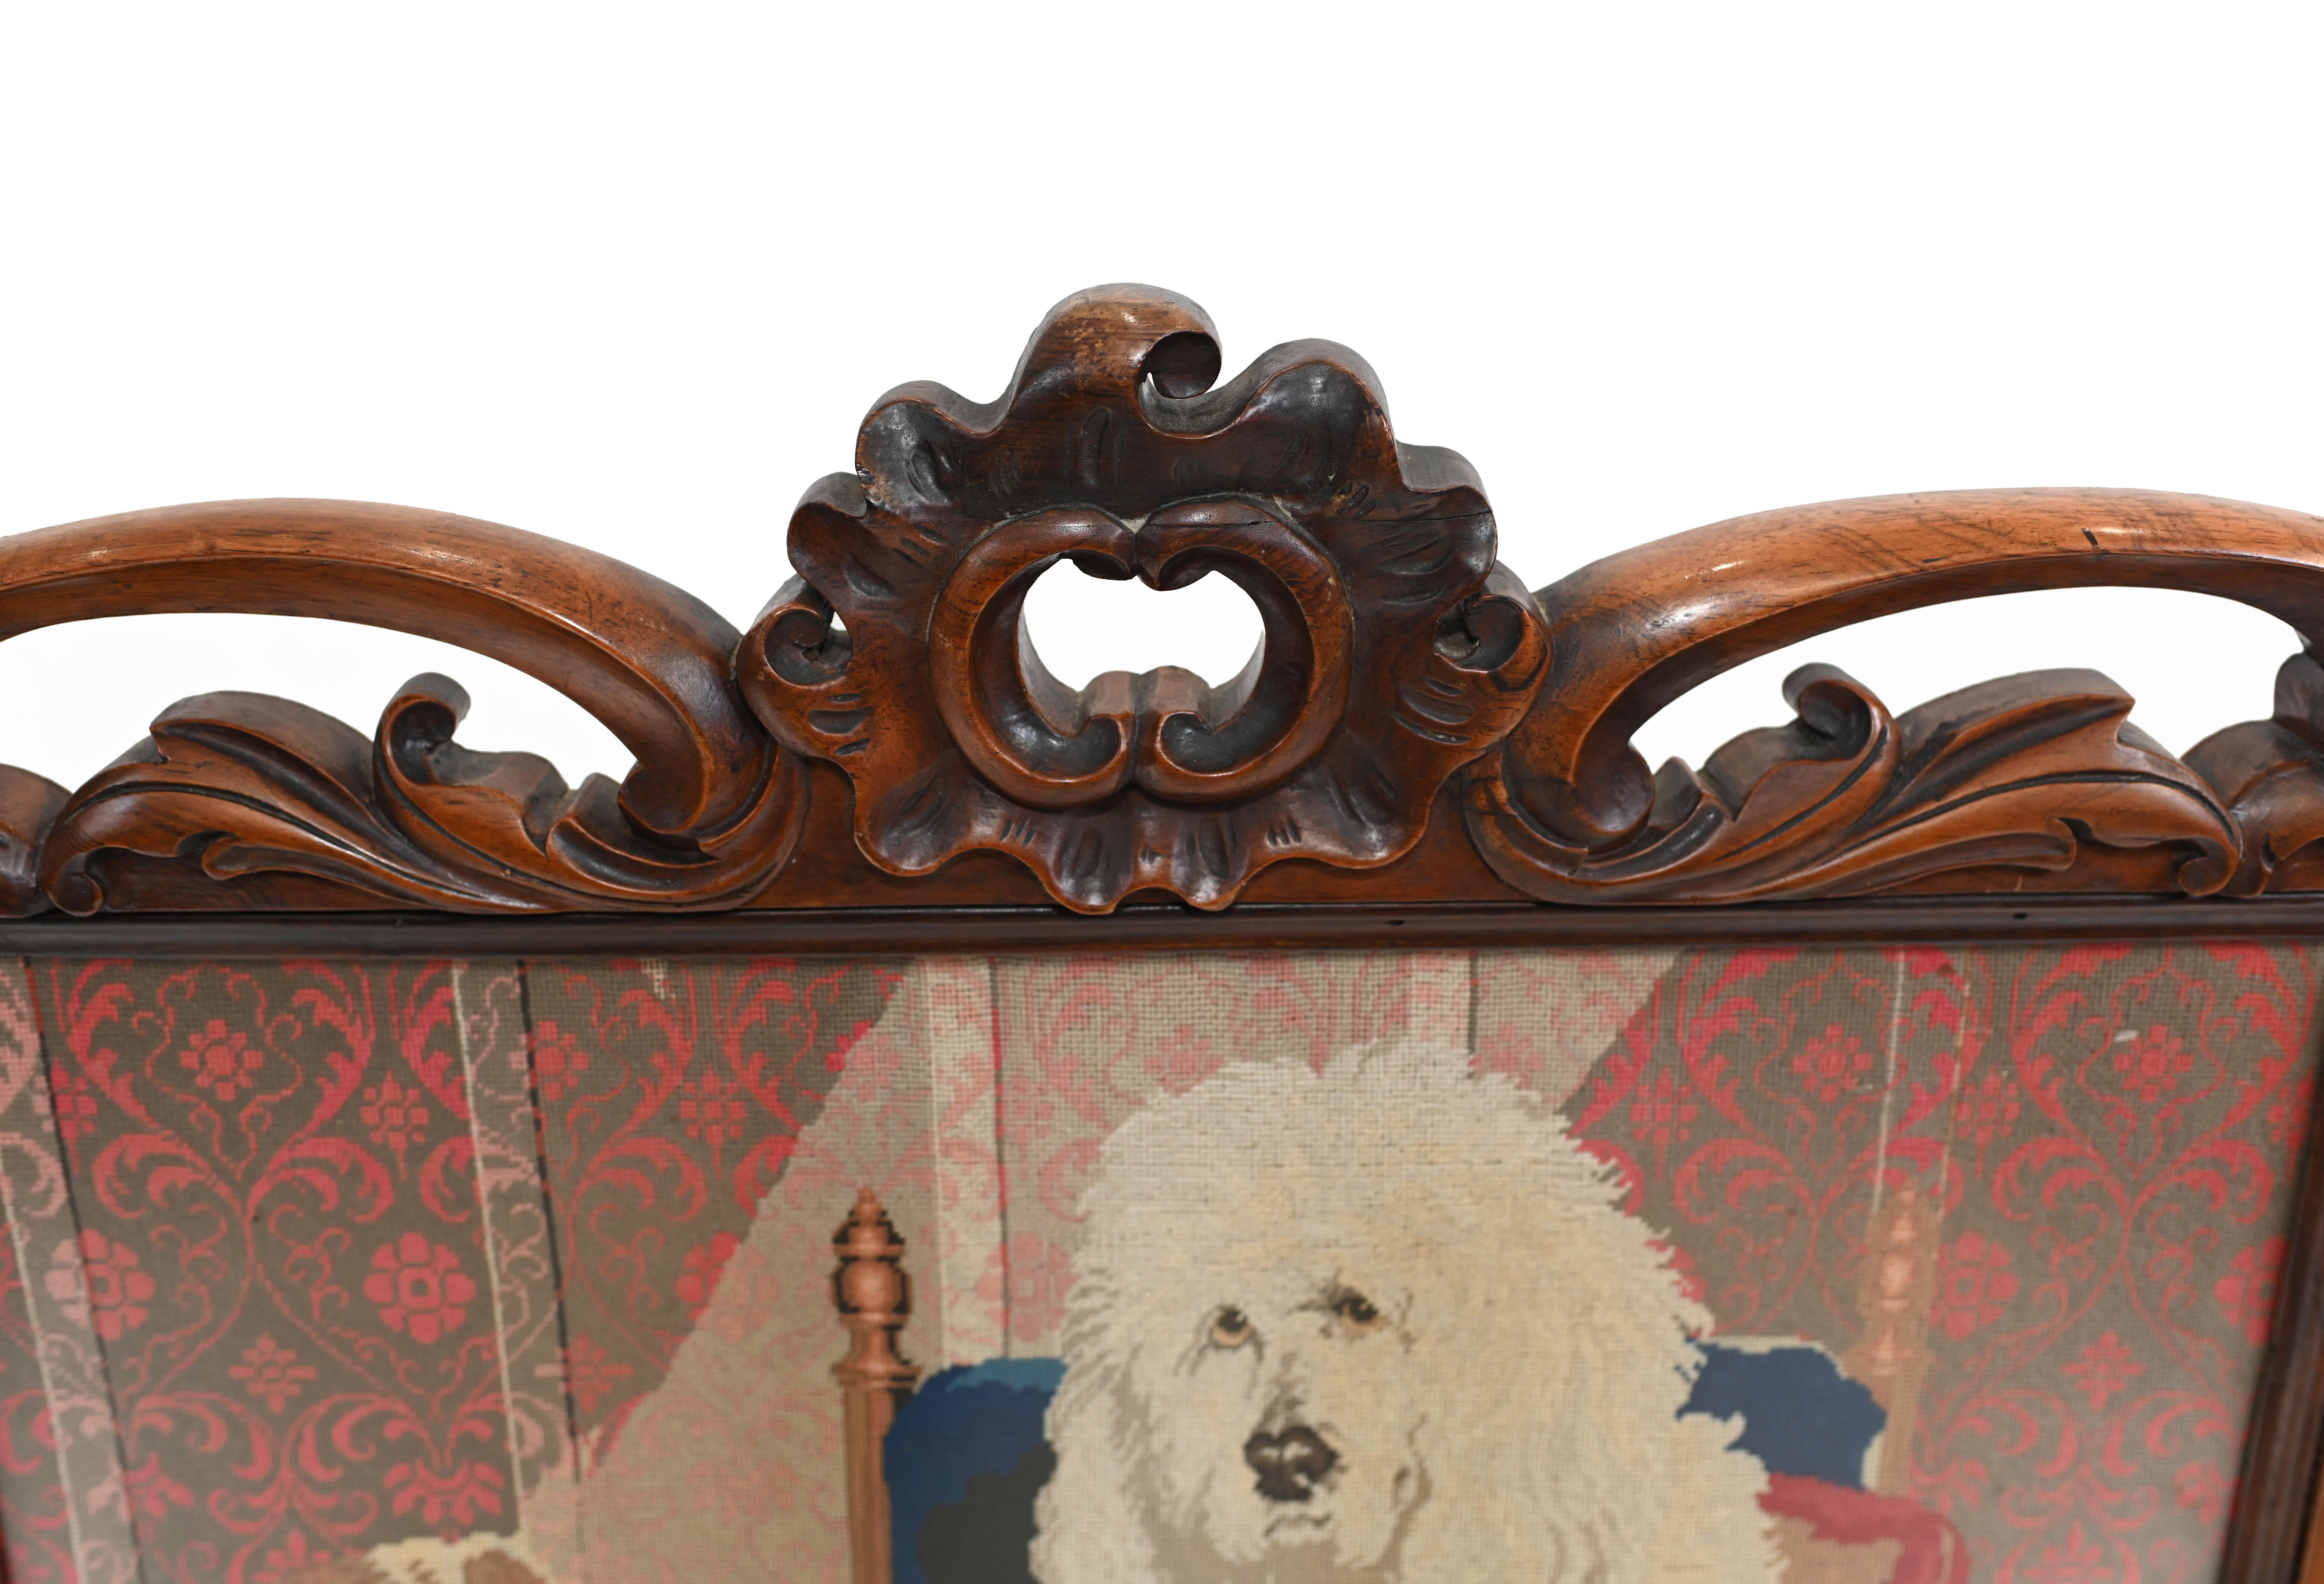 Wonderful tapestry rendition of Edwin Landseer's Trial by Jury
Very intricately crafted piece showing poodles and spaniels
Comes in the carved mahogany frame
This antique piece is a rendition of a painting by Landseer where the original is in